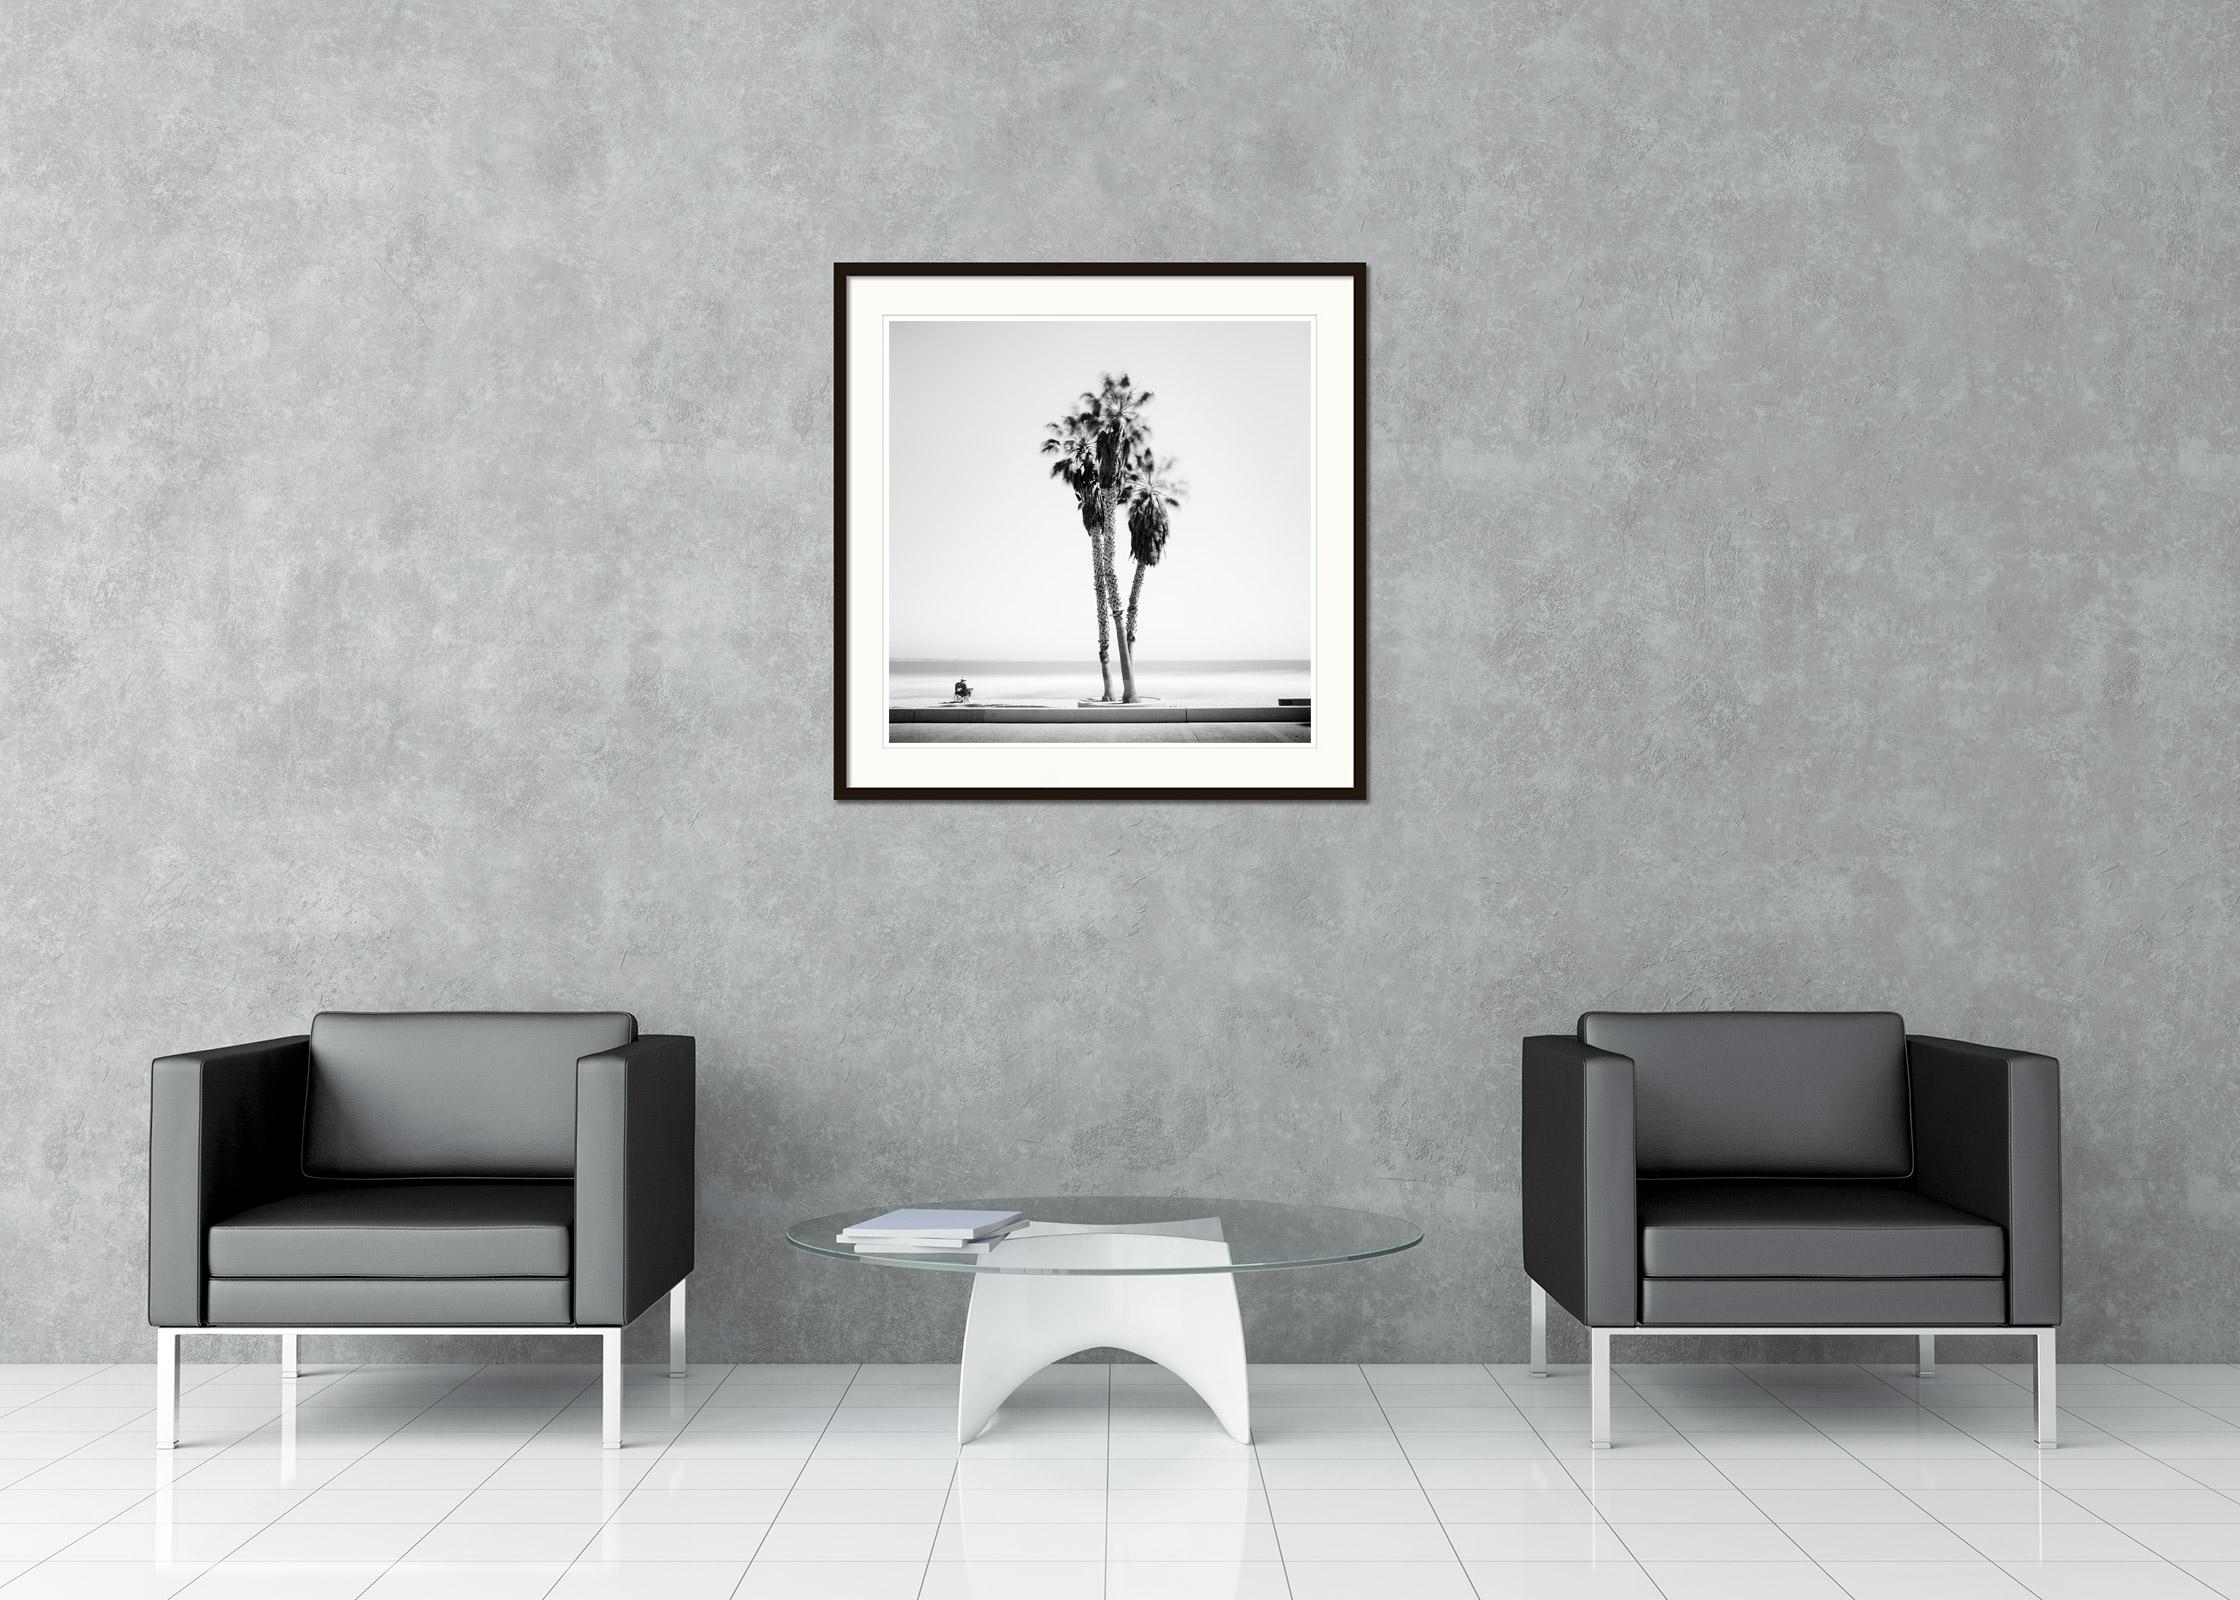 Black and white fine art landscape photography. Archival pigment ink print, edition of 20. Signed, titled, dated and numbered by artist. Certificate of authenticity included. Printed with 4cm white border.
International award winner photographer -